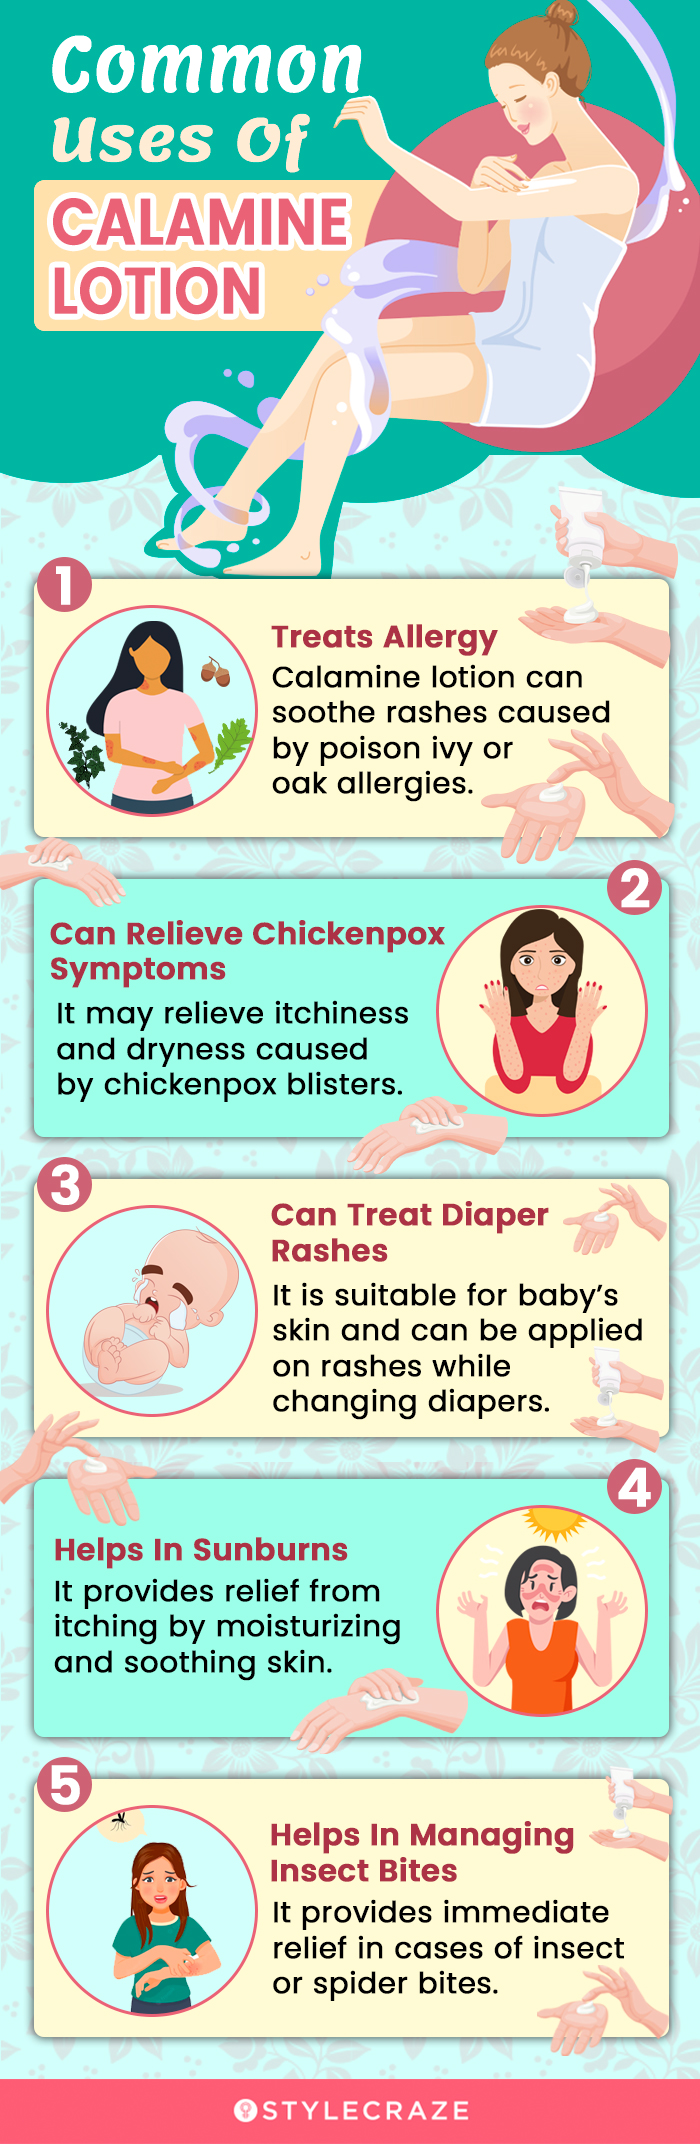 common uses of calamine lotion [infographic]